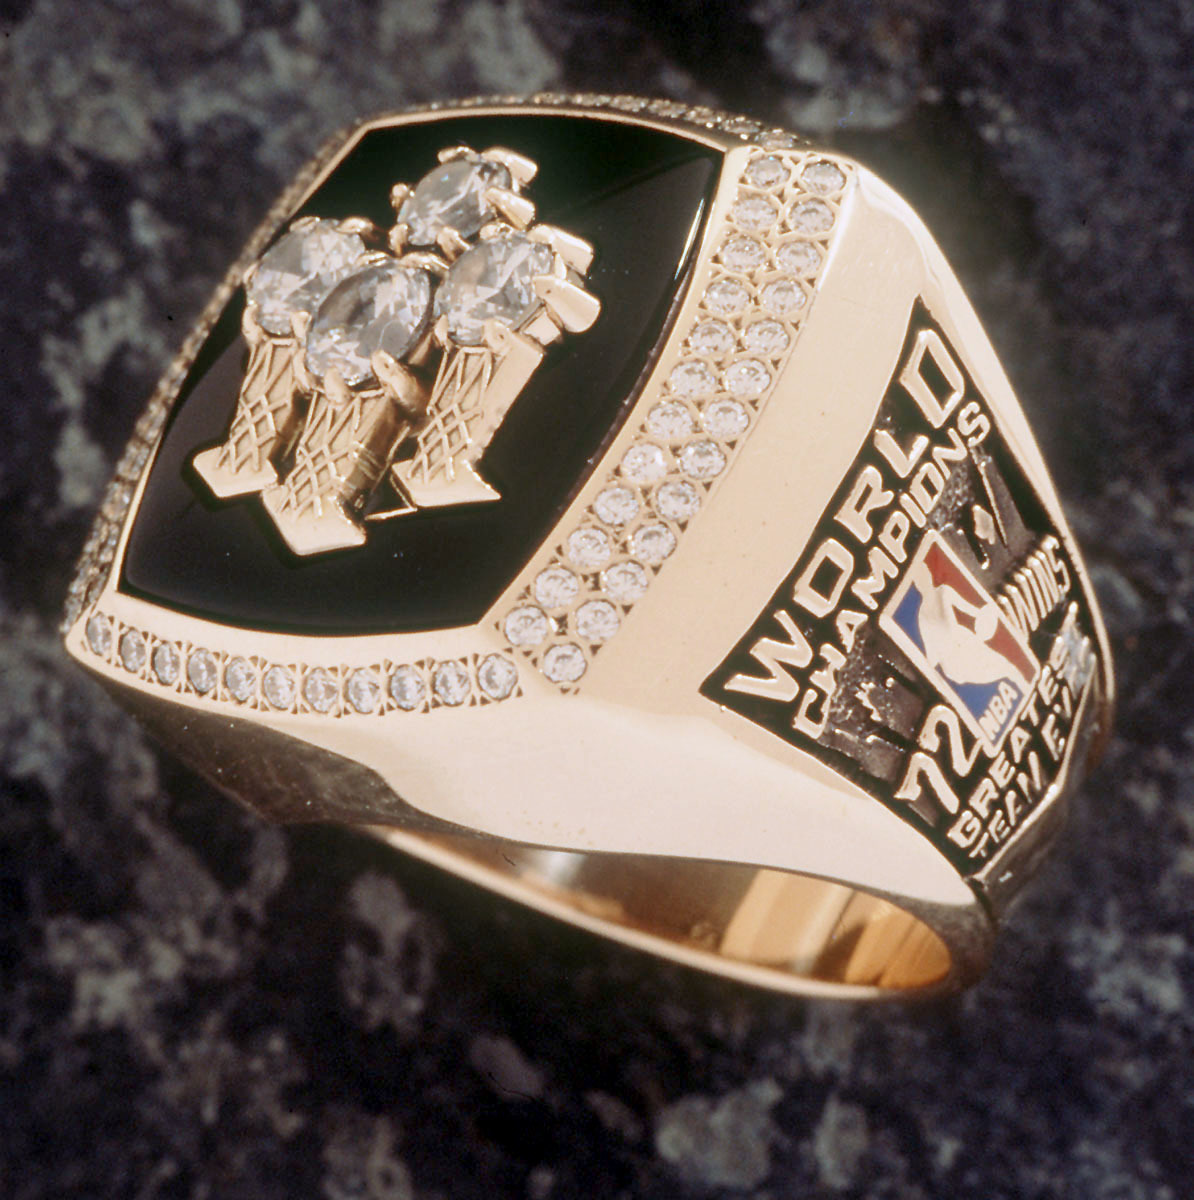 Six Bulls championship rings sold at auction for a combined $255,840.